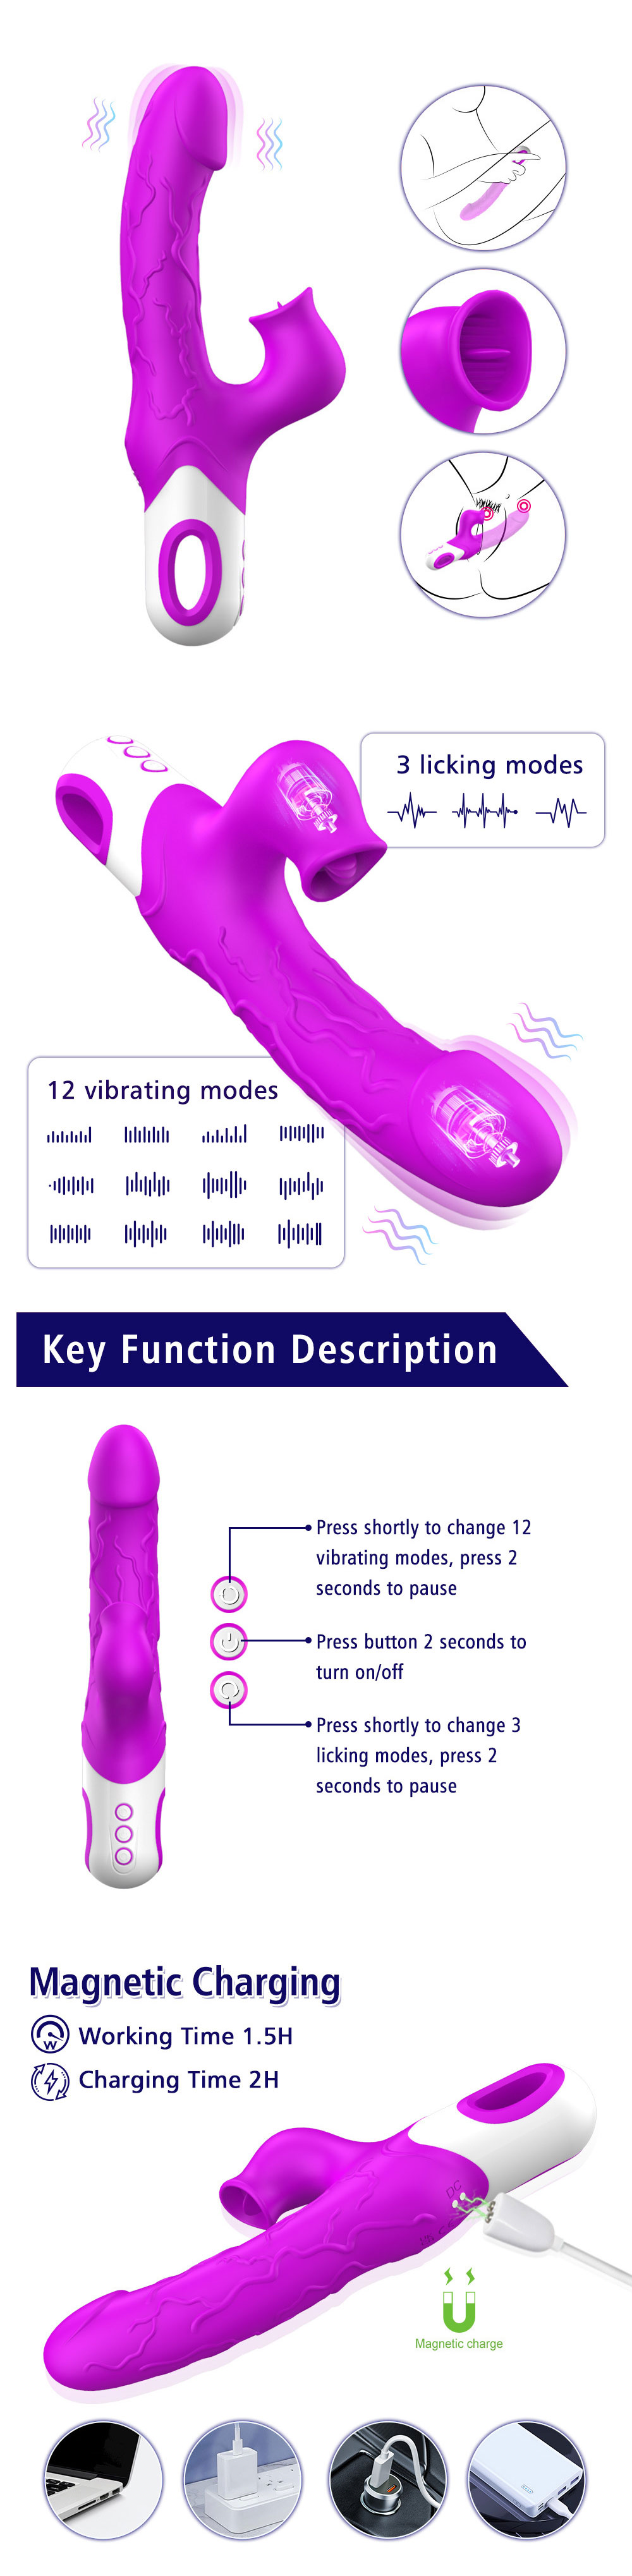 Powerful Licking and Vibrating Wand qq